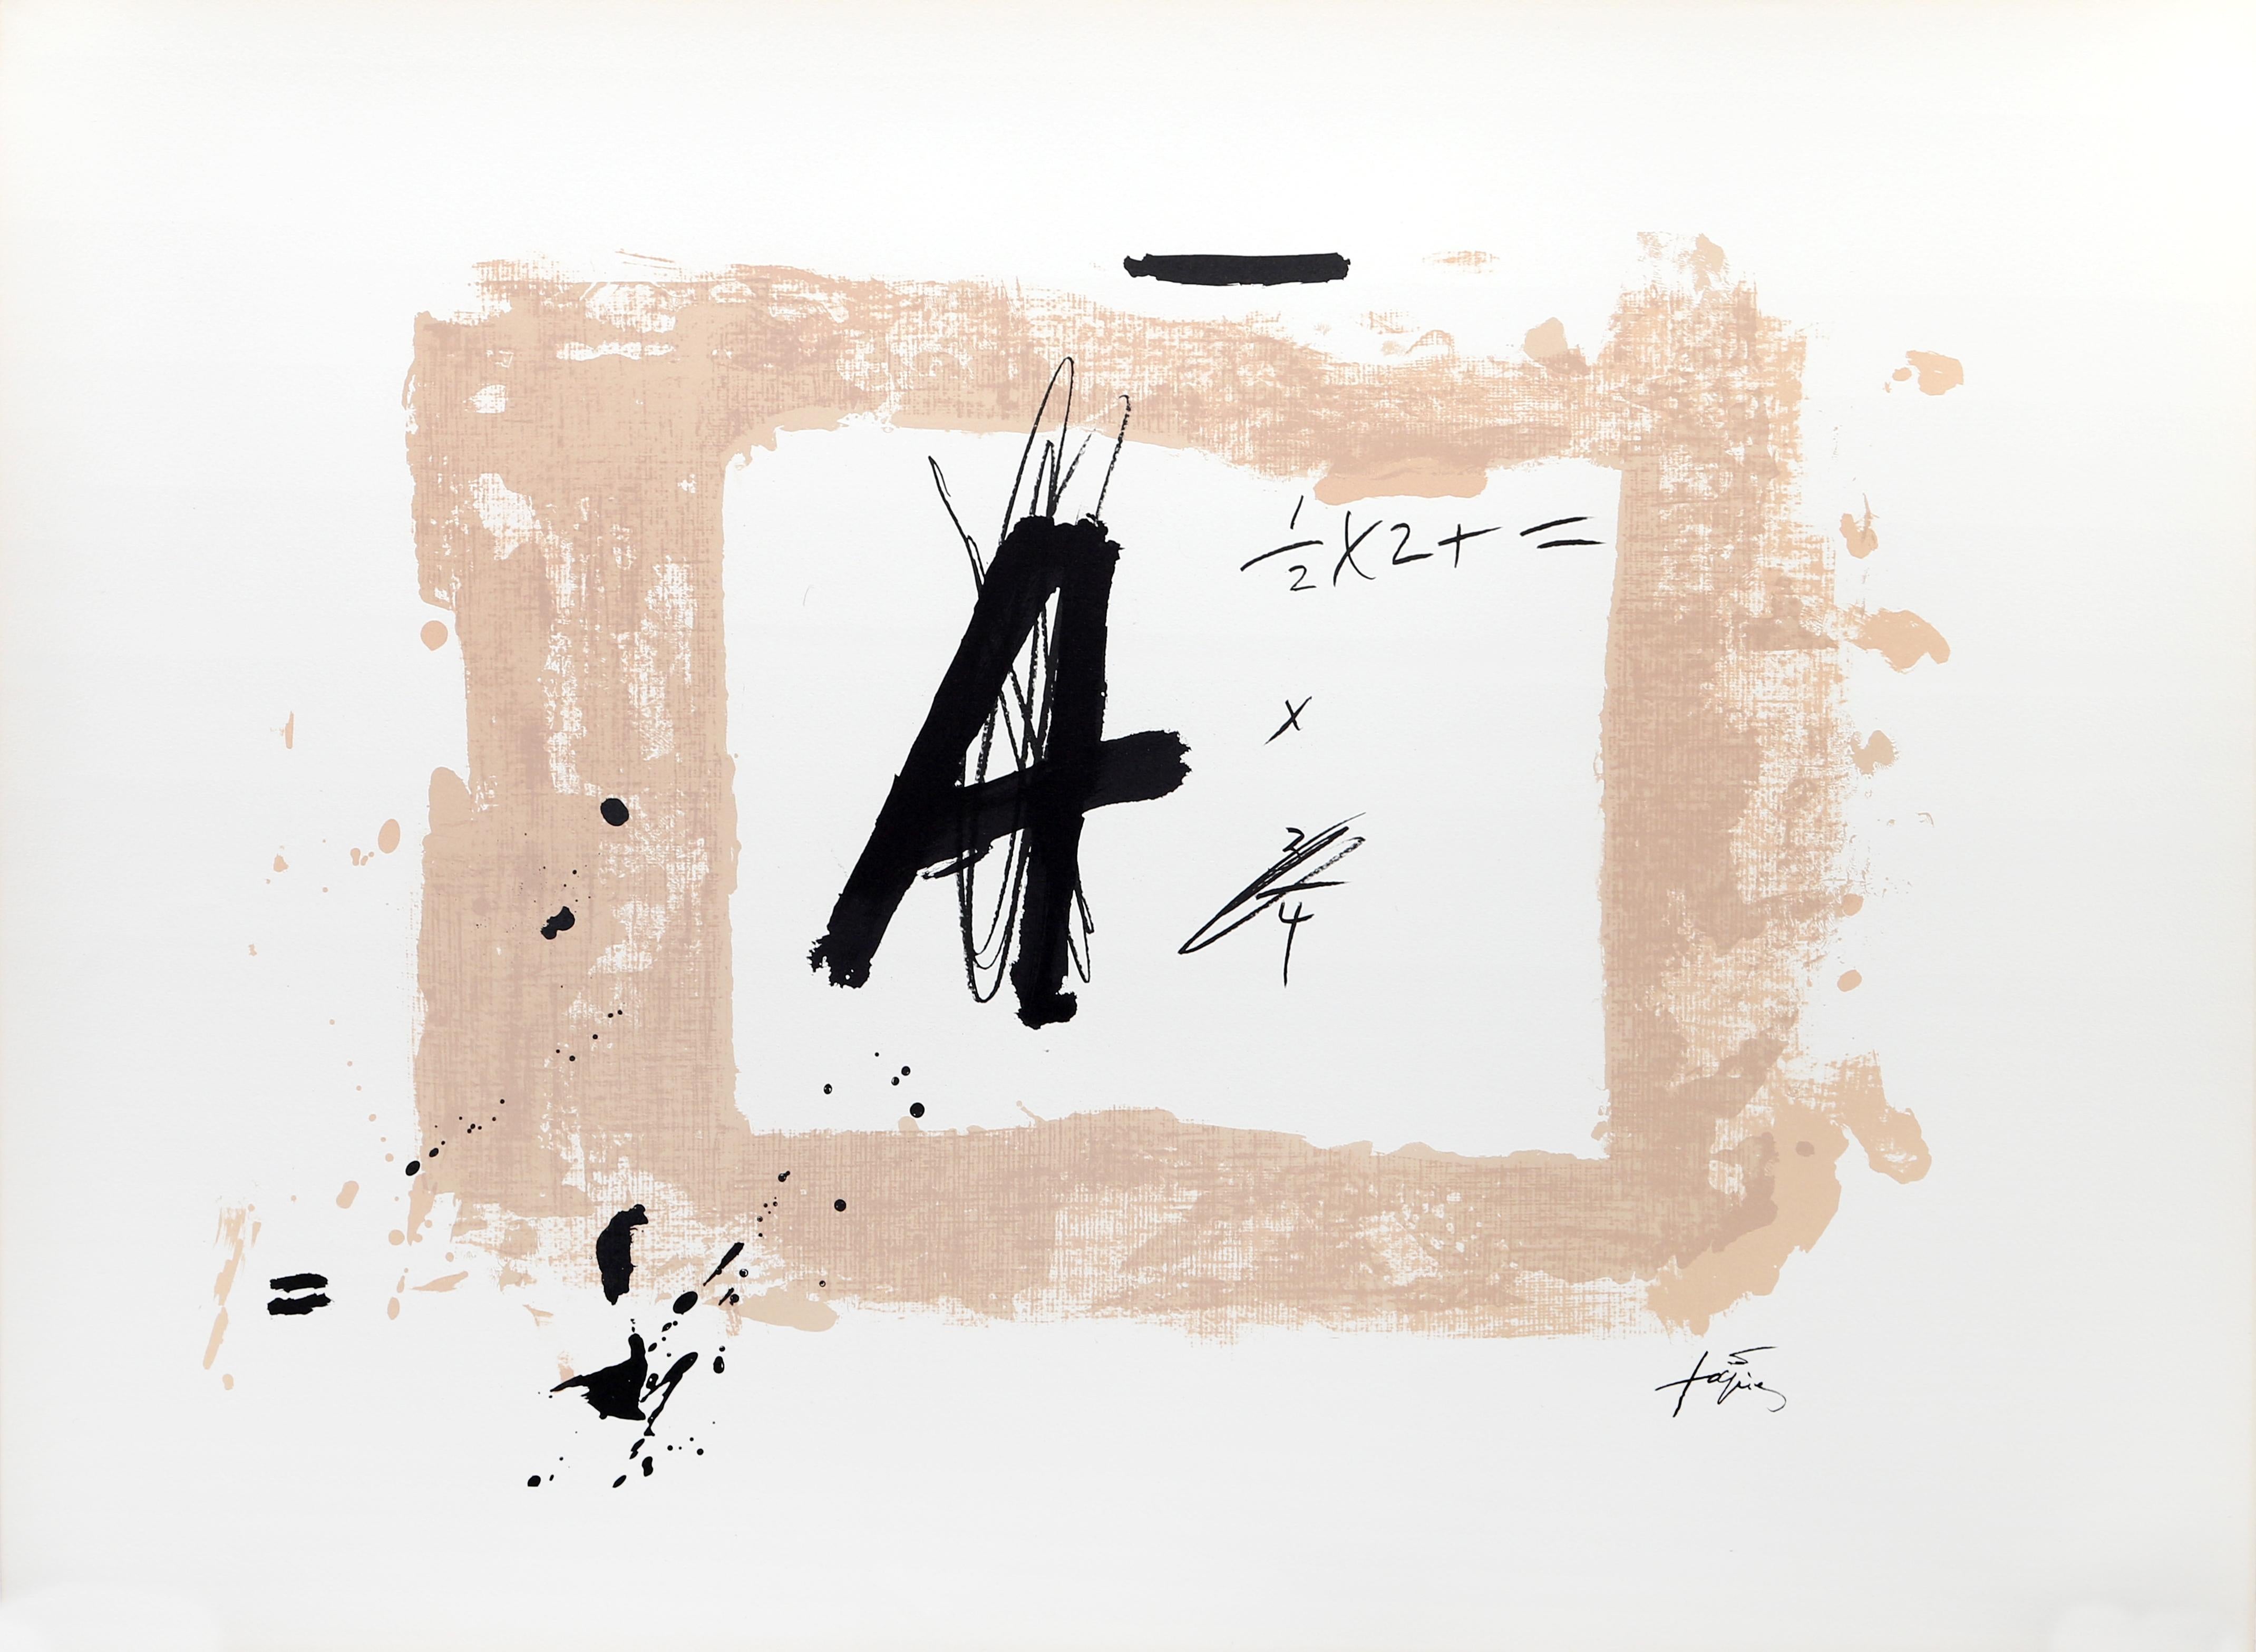 The Letter "A", by Antoni Tapies